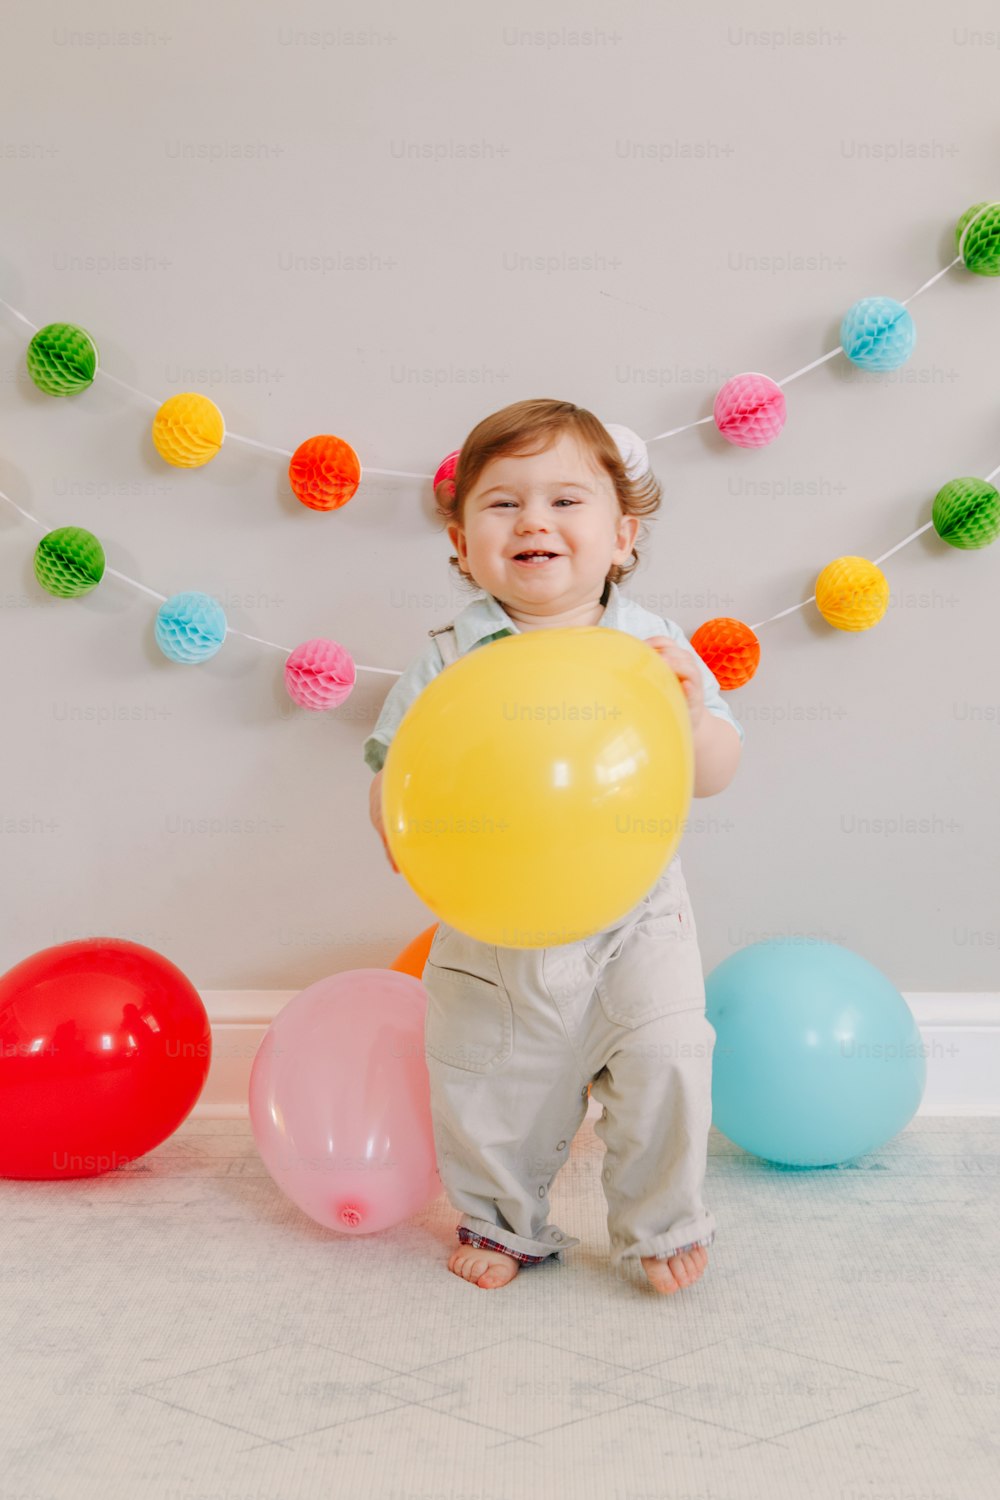 500+ Baby Birthday Pictures [HD] | Download Free Images on Unsplash